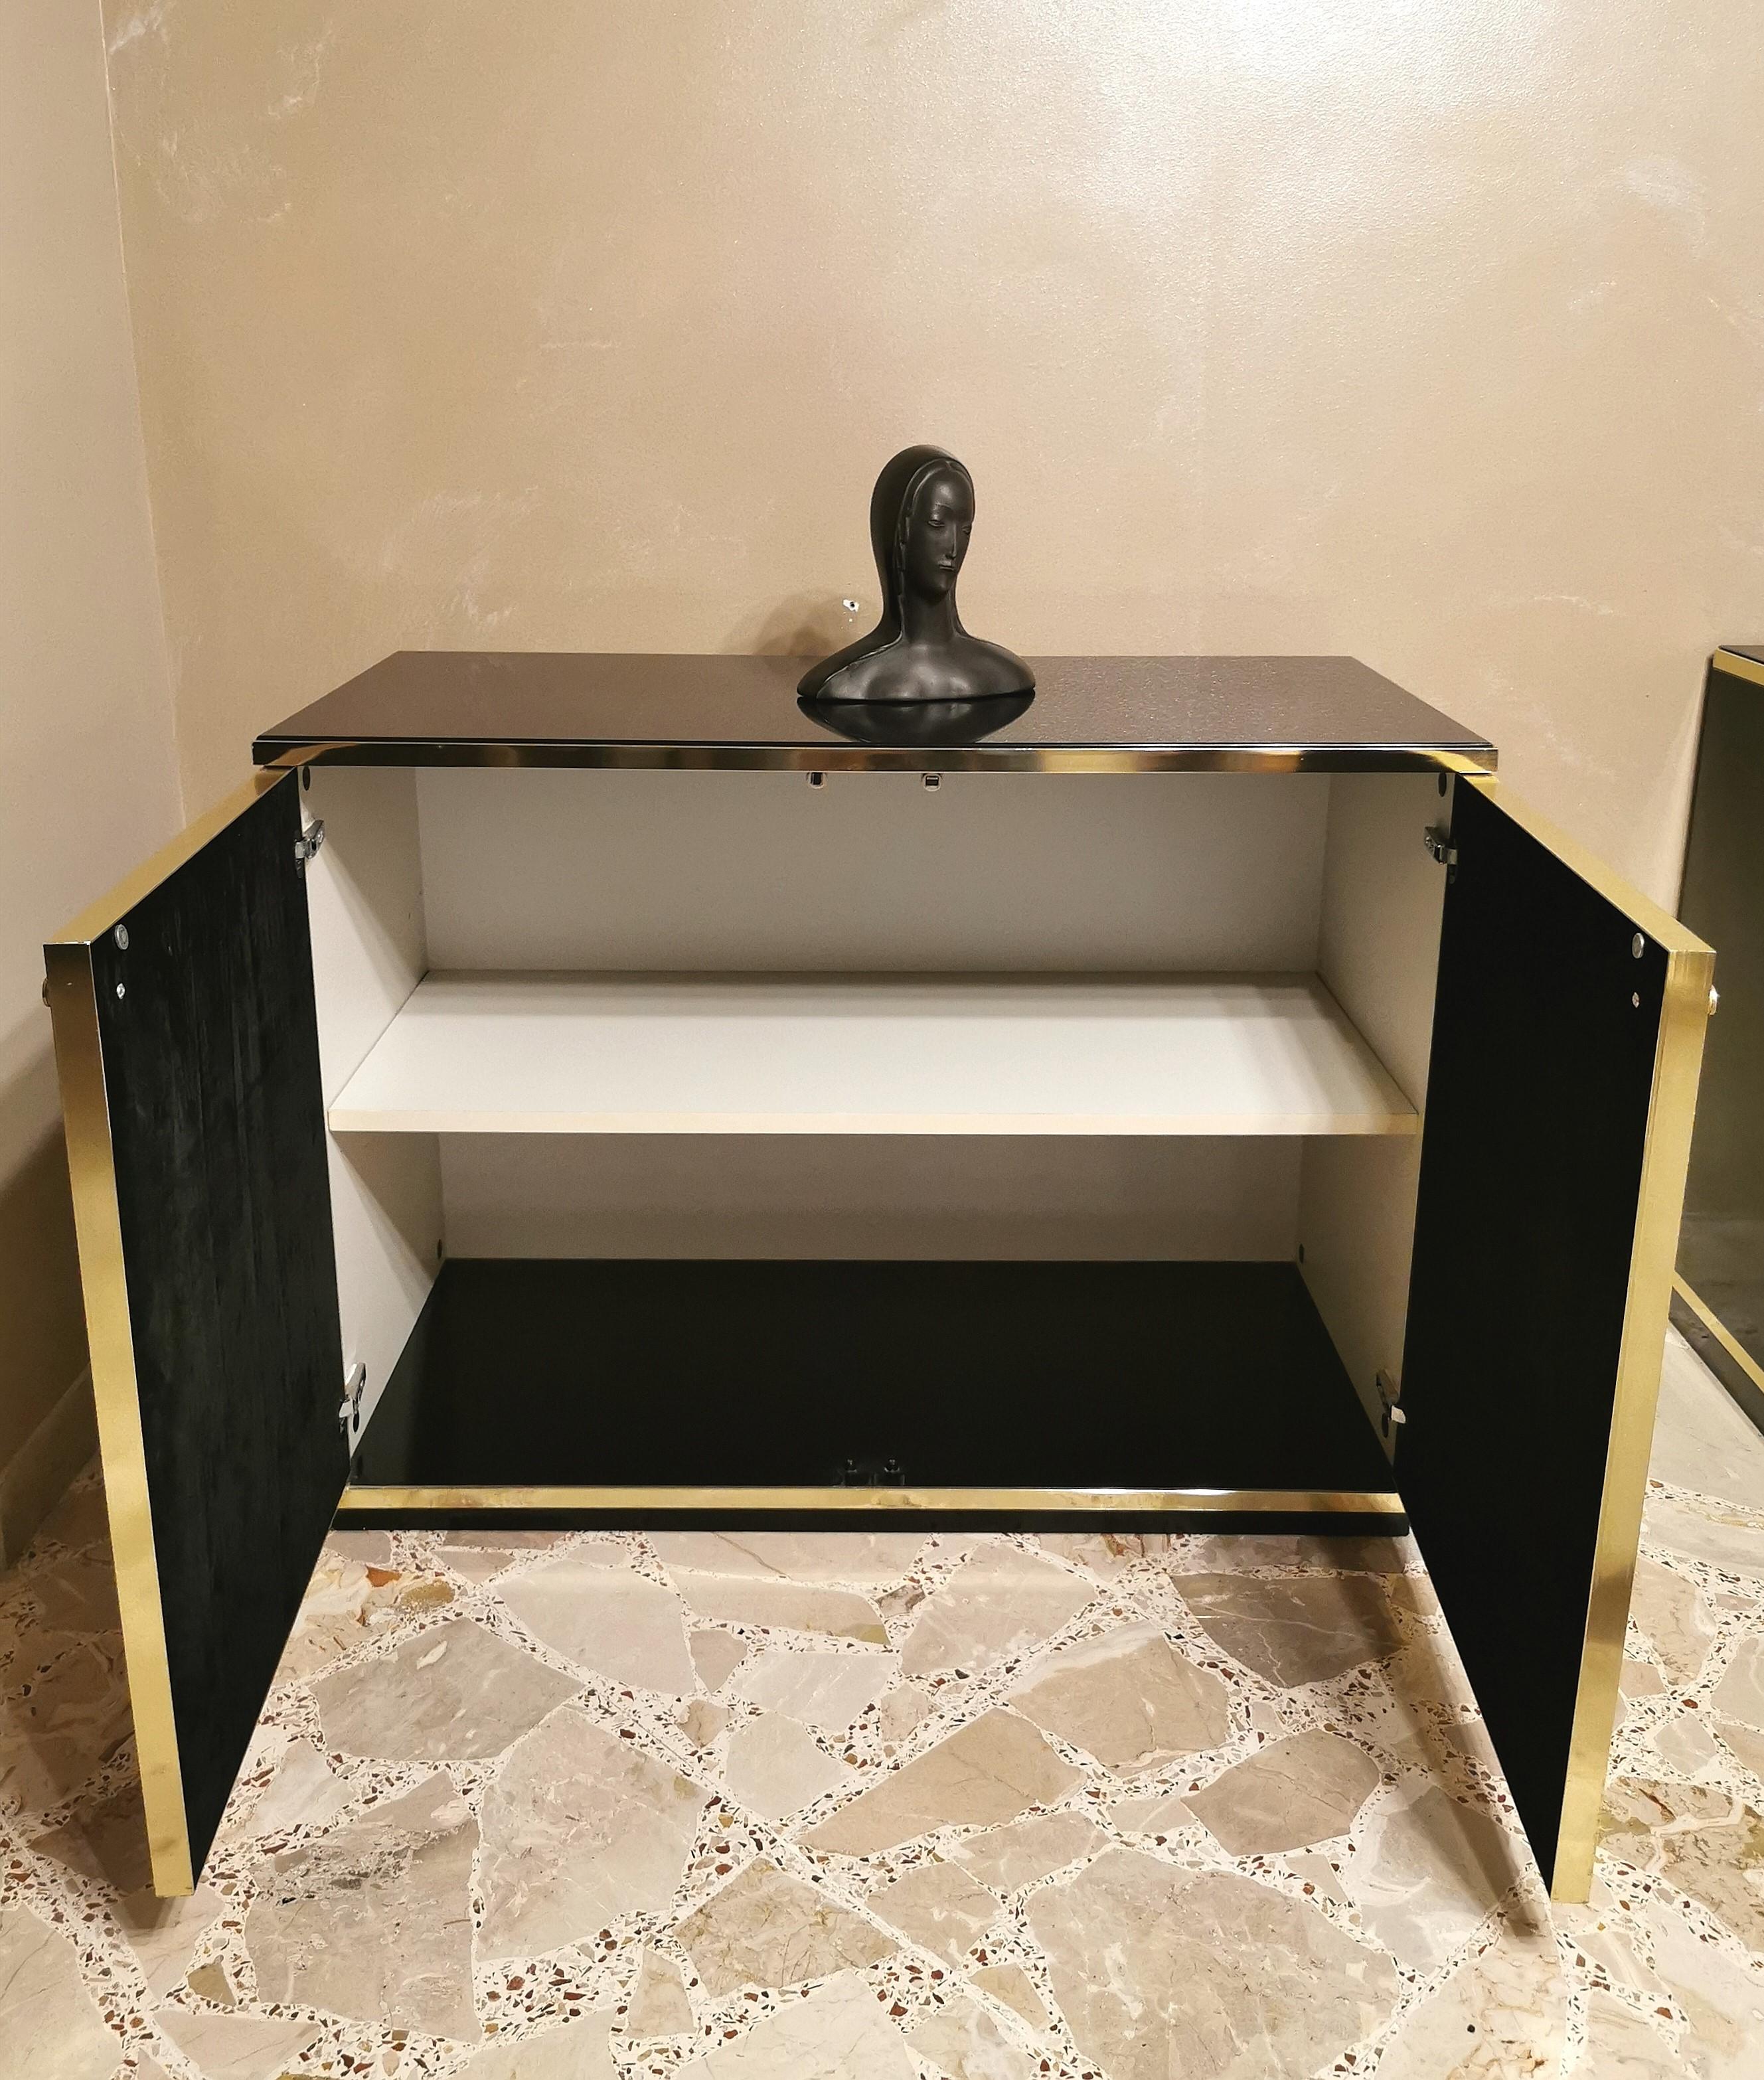 Elegant buffet designed by the Italian designer Renato Zevi in the 70s. The buffet has a black lacquered wooden structure, a dark glass top, 2 bronze mirrored glass doors with black suede inside and 1 wooden shelf. Finishes in gilded aluminum and